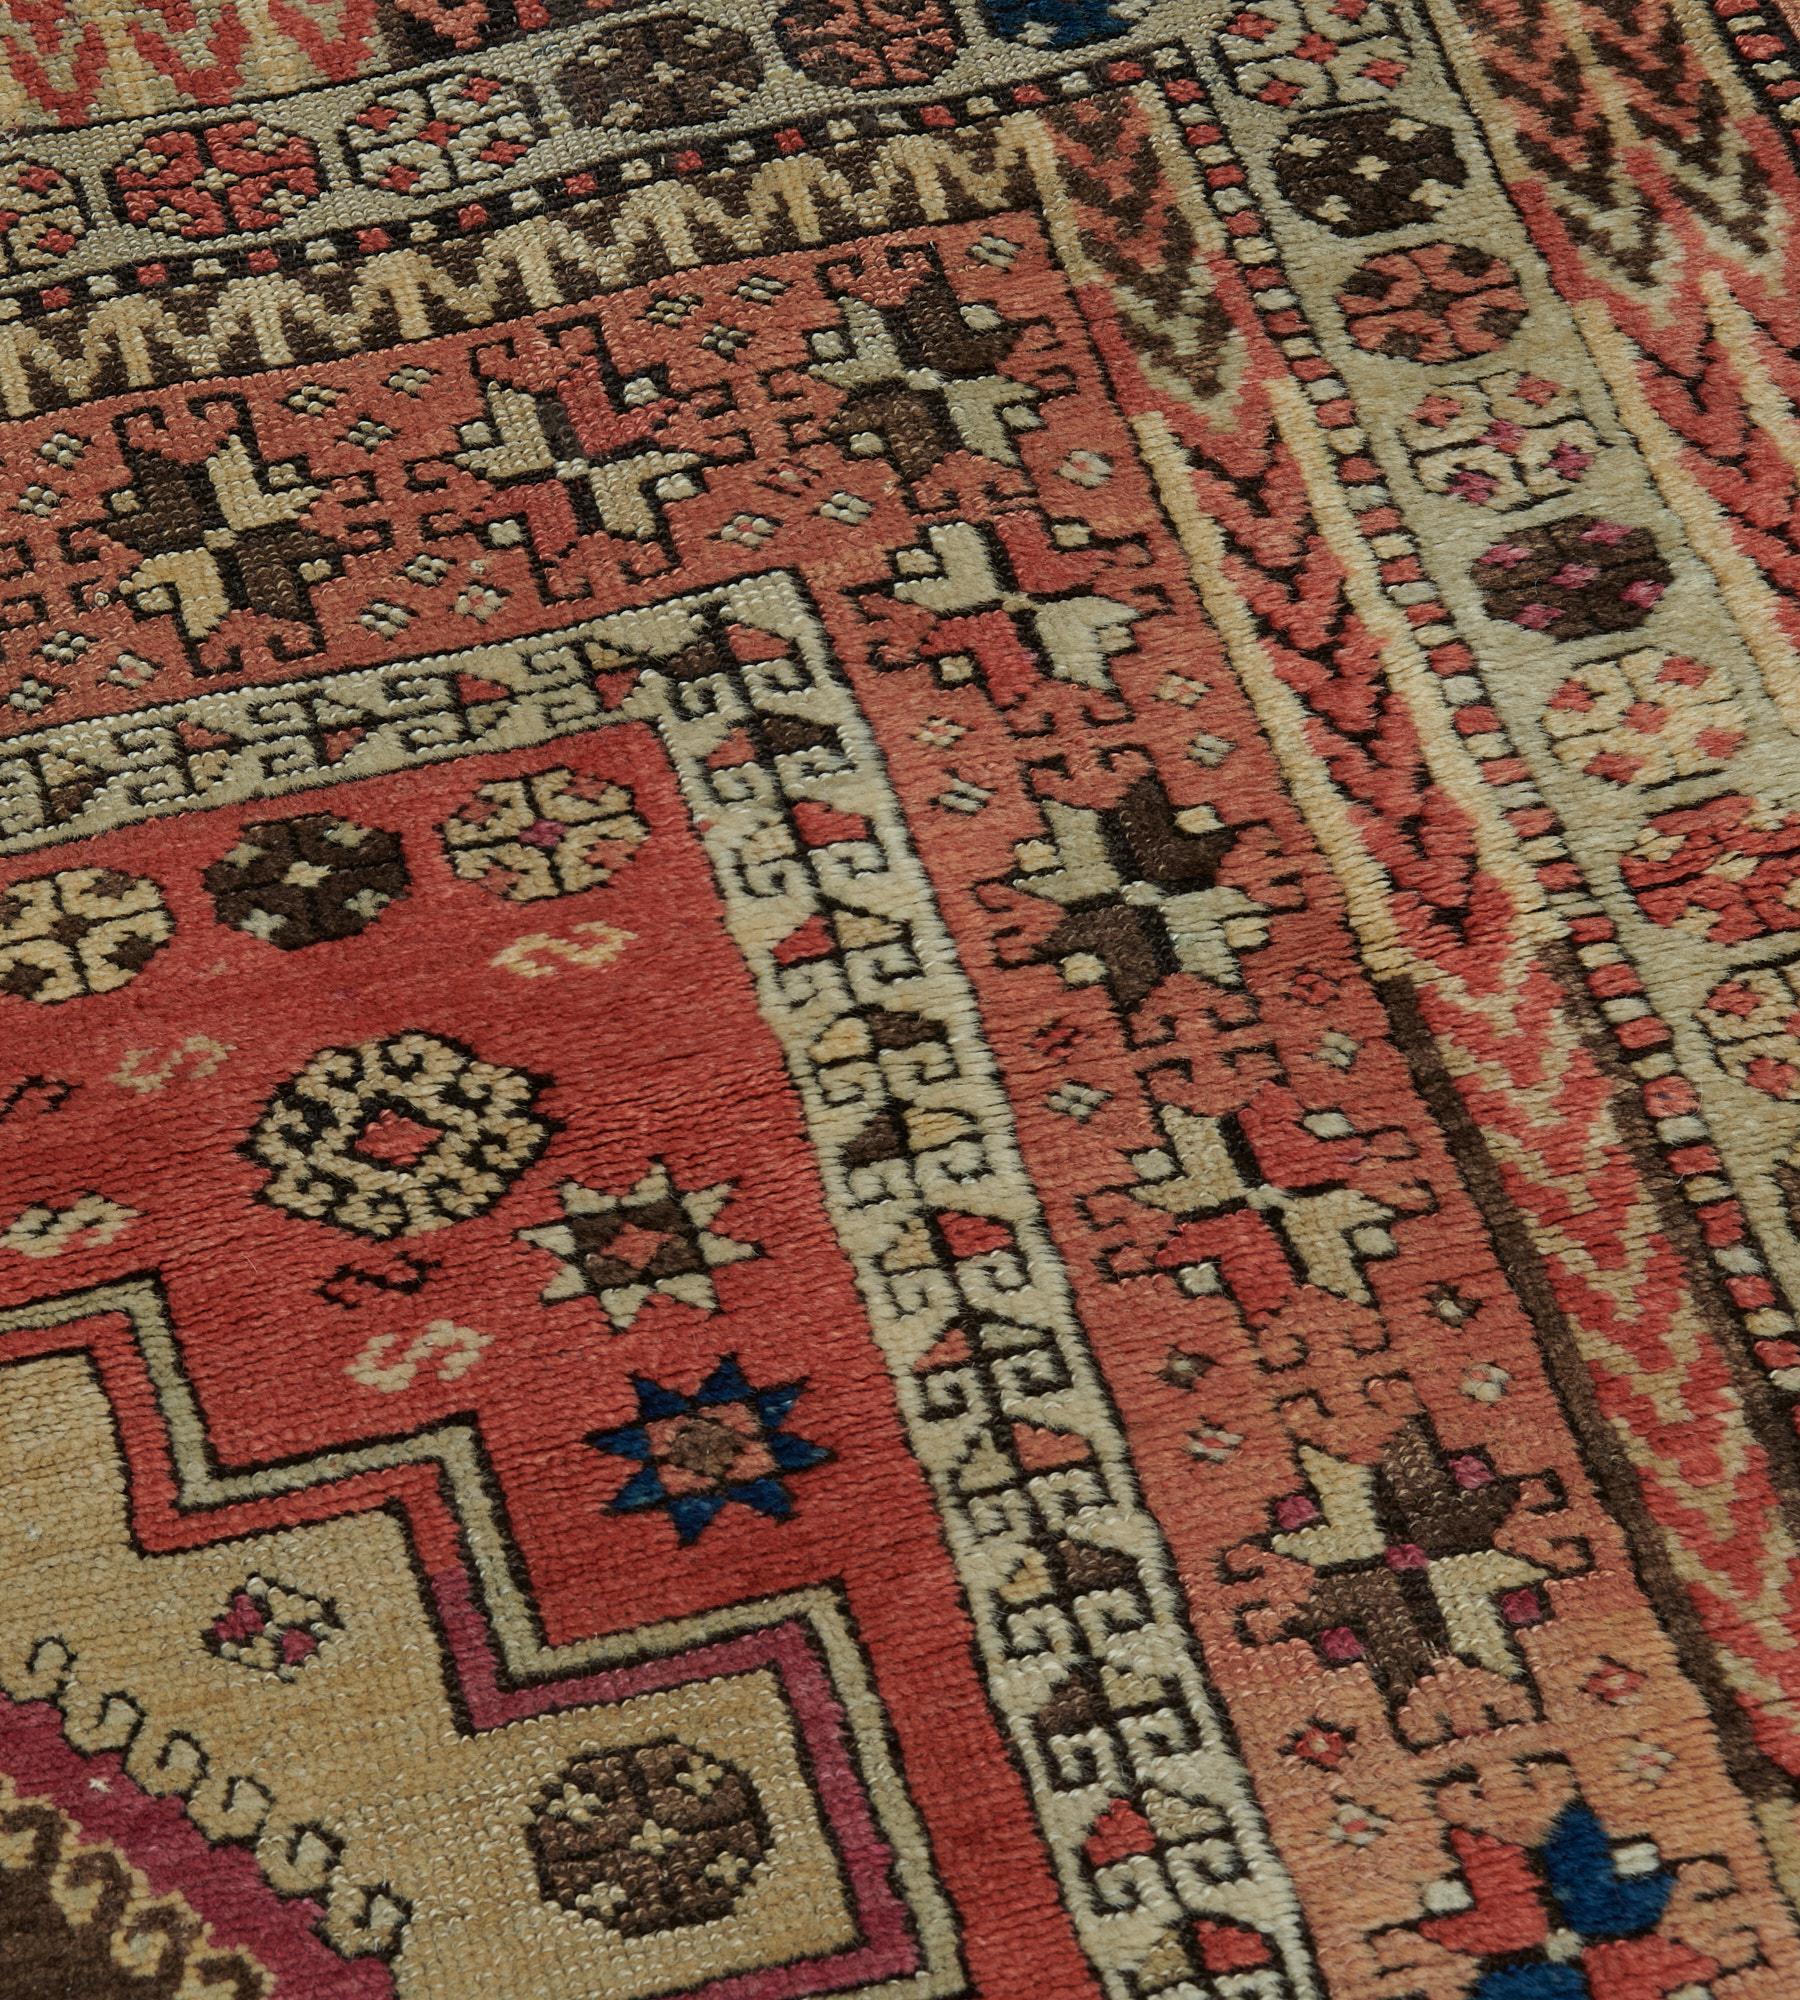 Antique Hand-Knotted Wool Traditional Karabagh Runner, c. 1880 For Sale 2